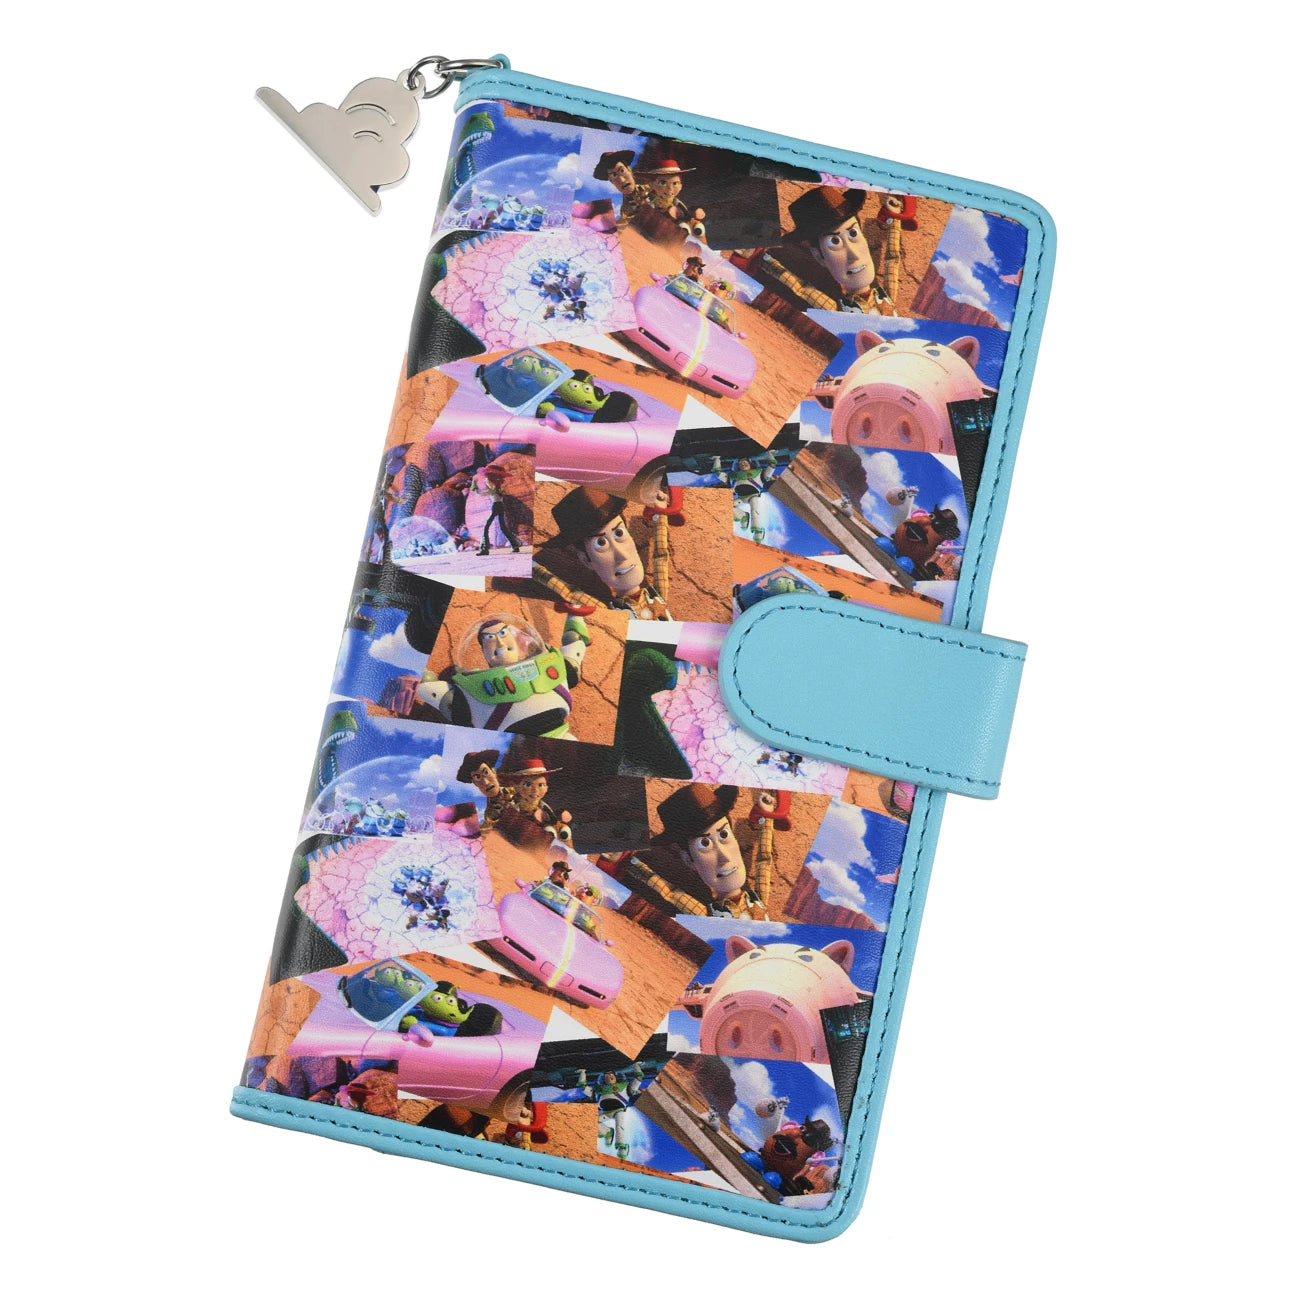 SDJ - Andy's World - Cell phone case